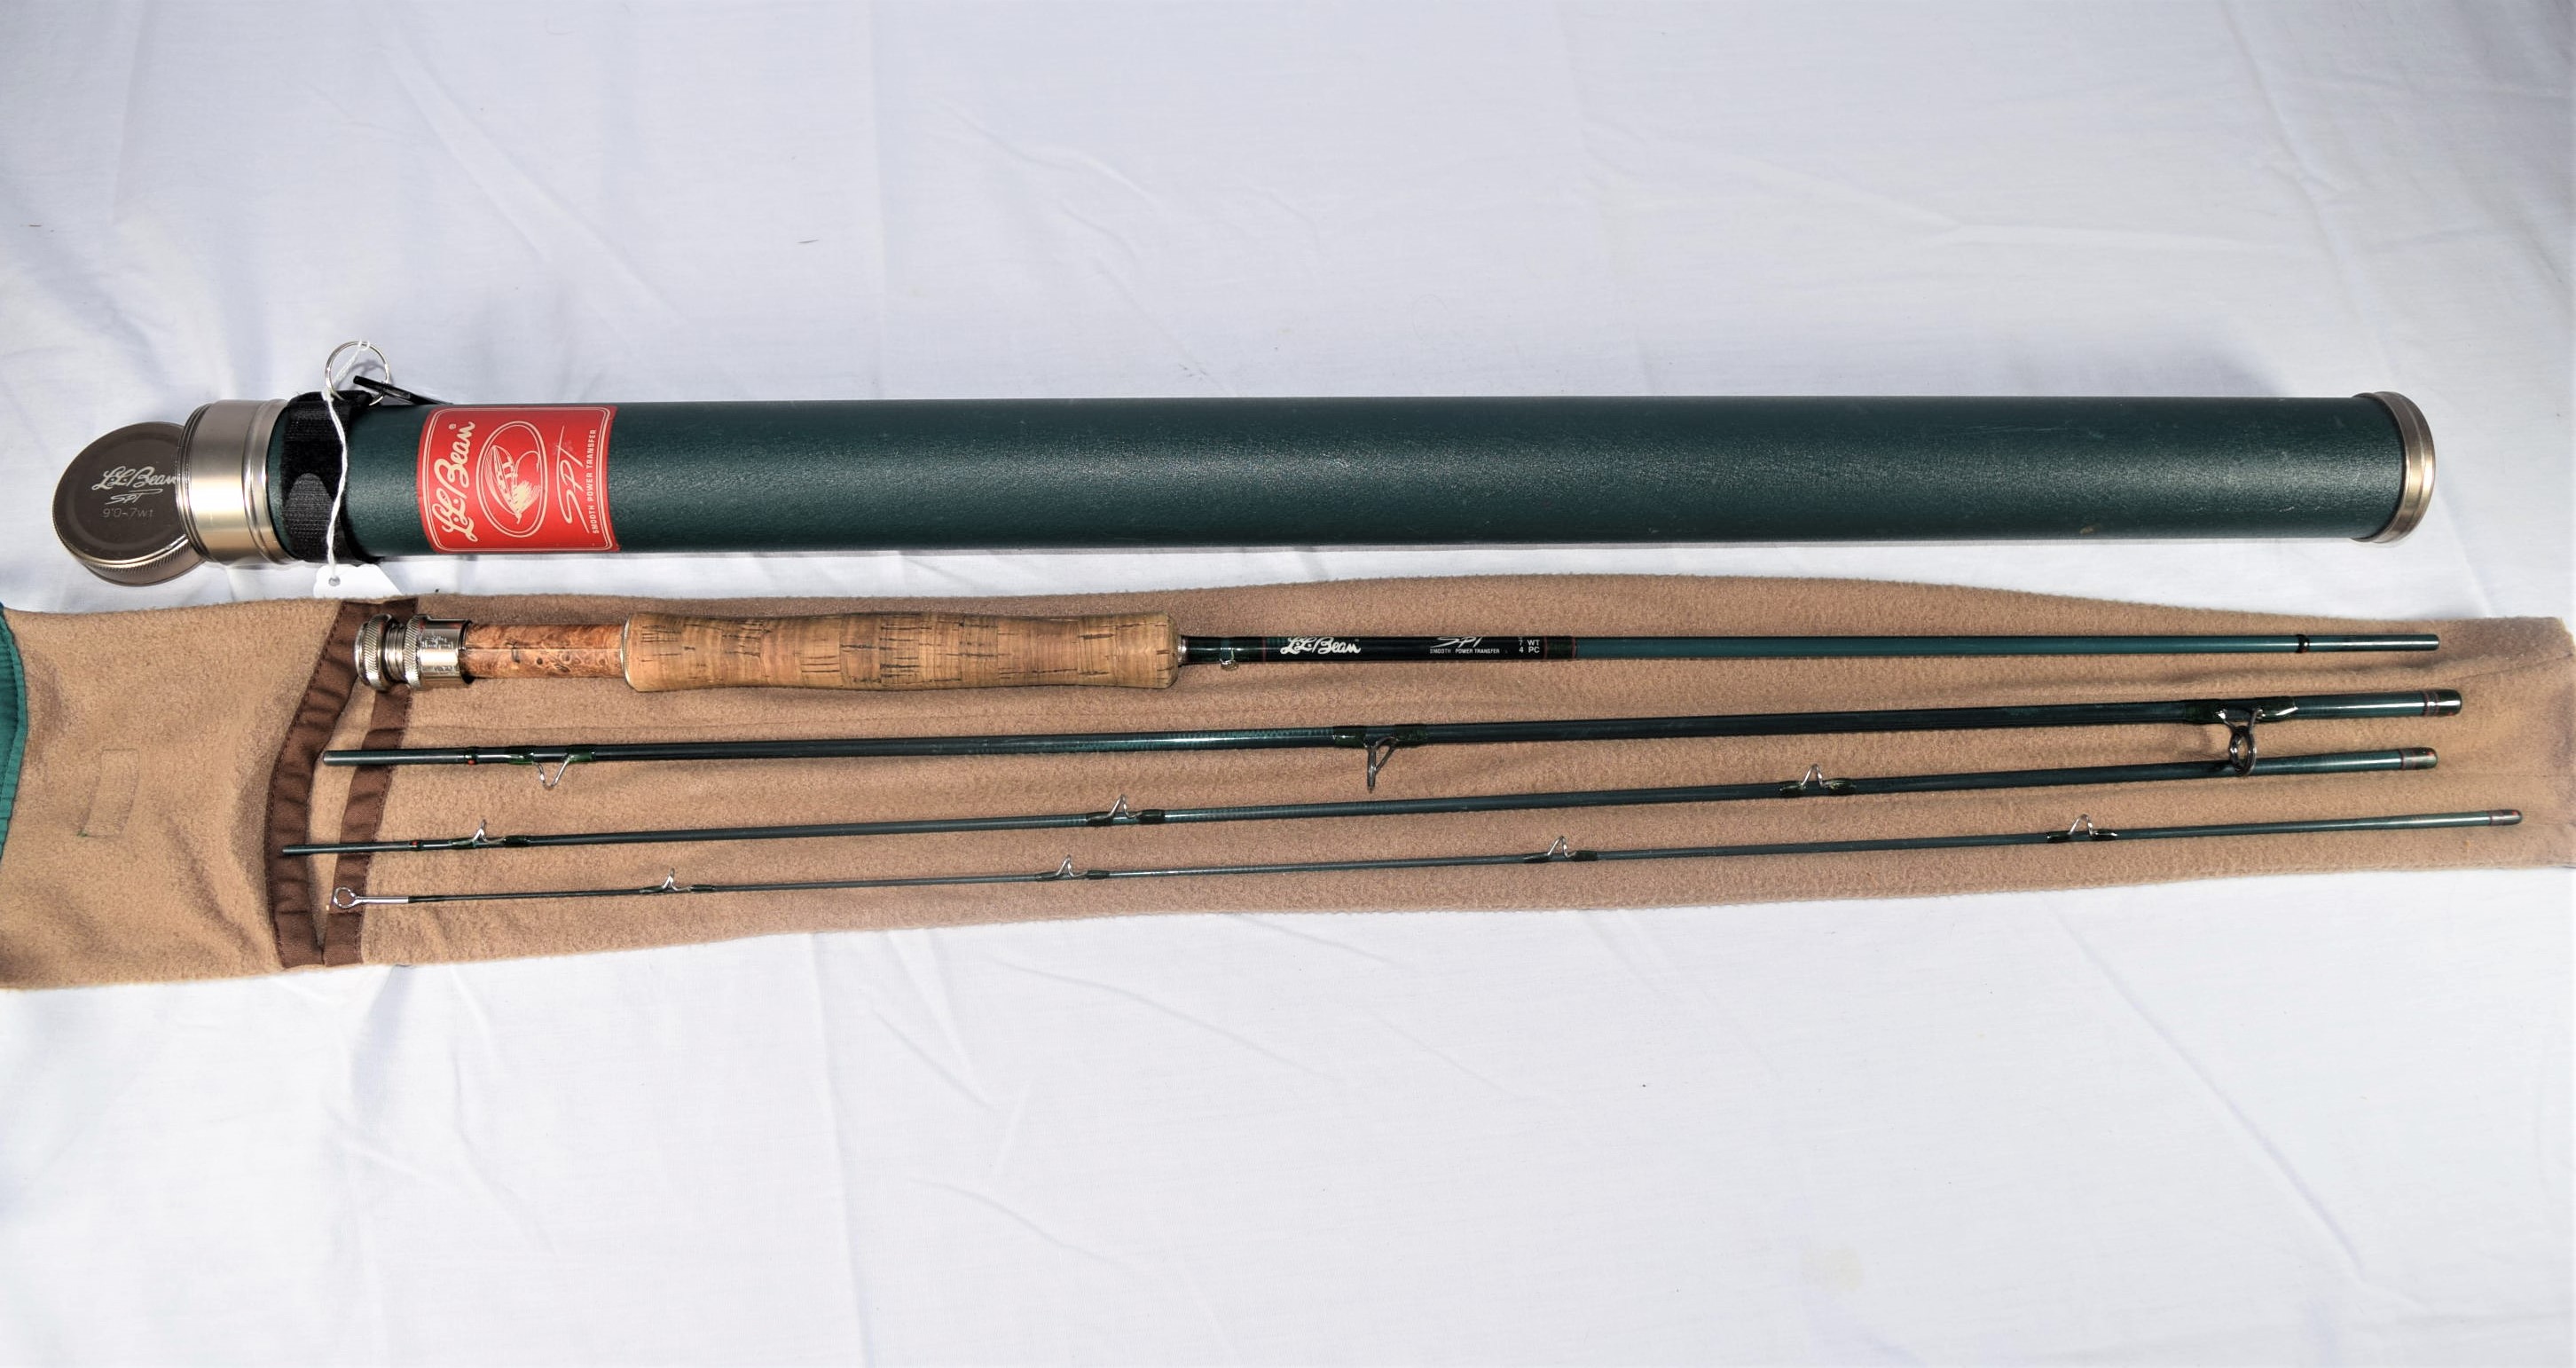 LL Bean SPT 9ft Fly Fishing Rod and Case